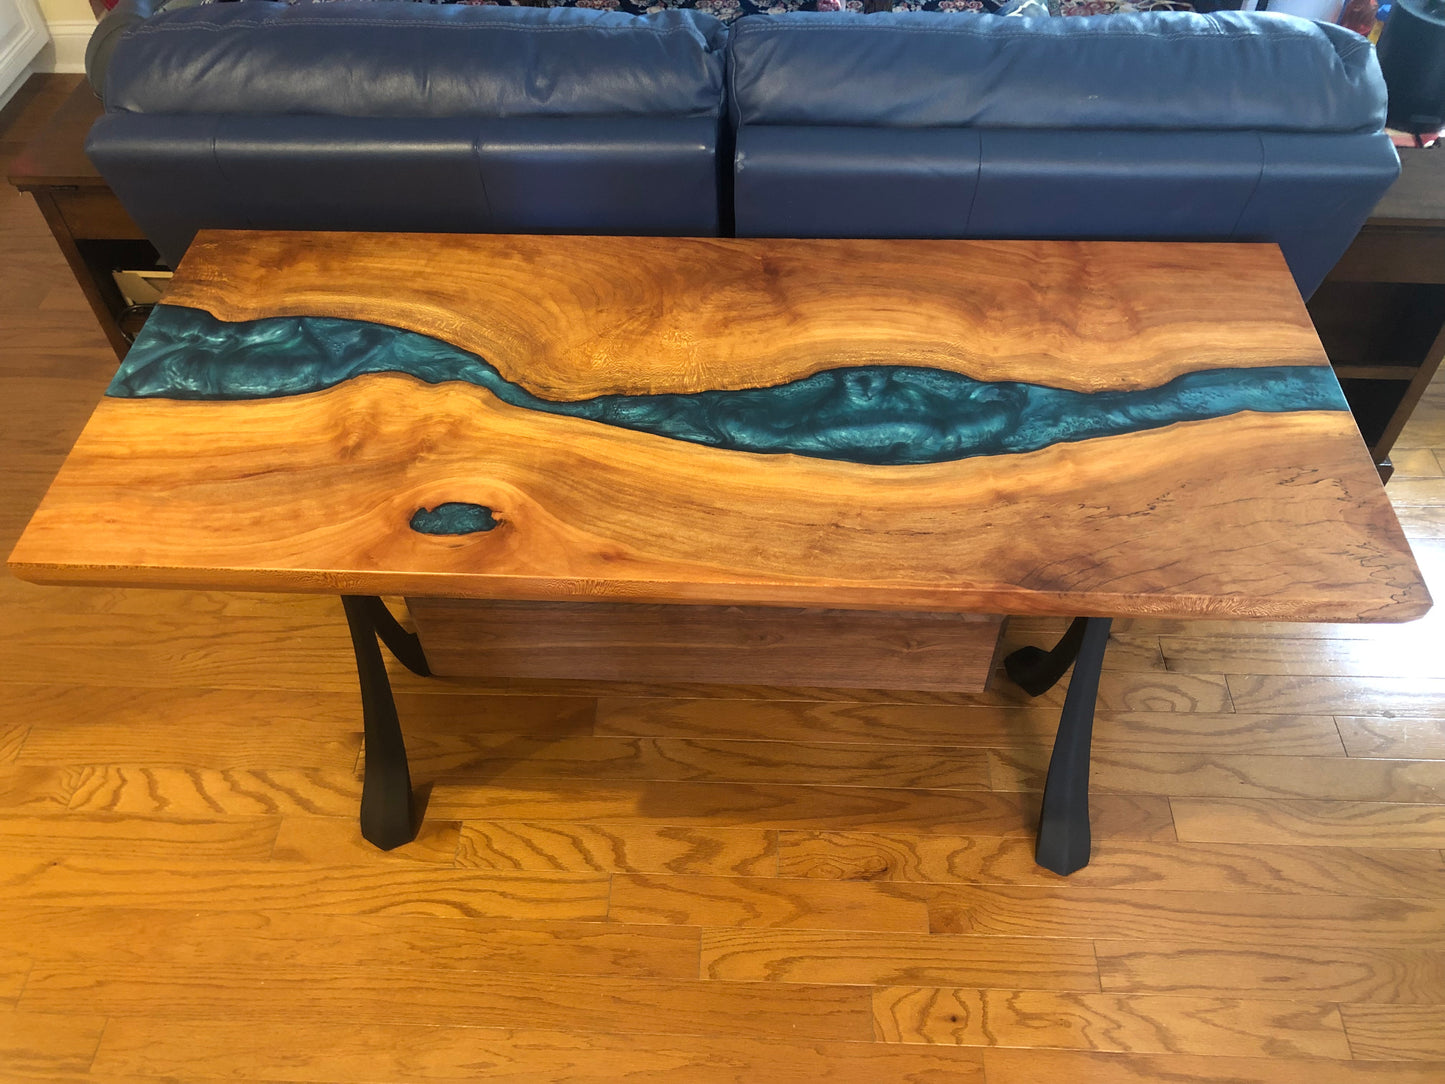 Top view of blue epoxy river table behind couch